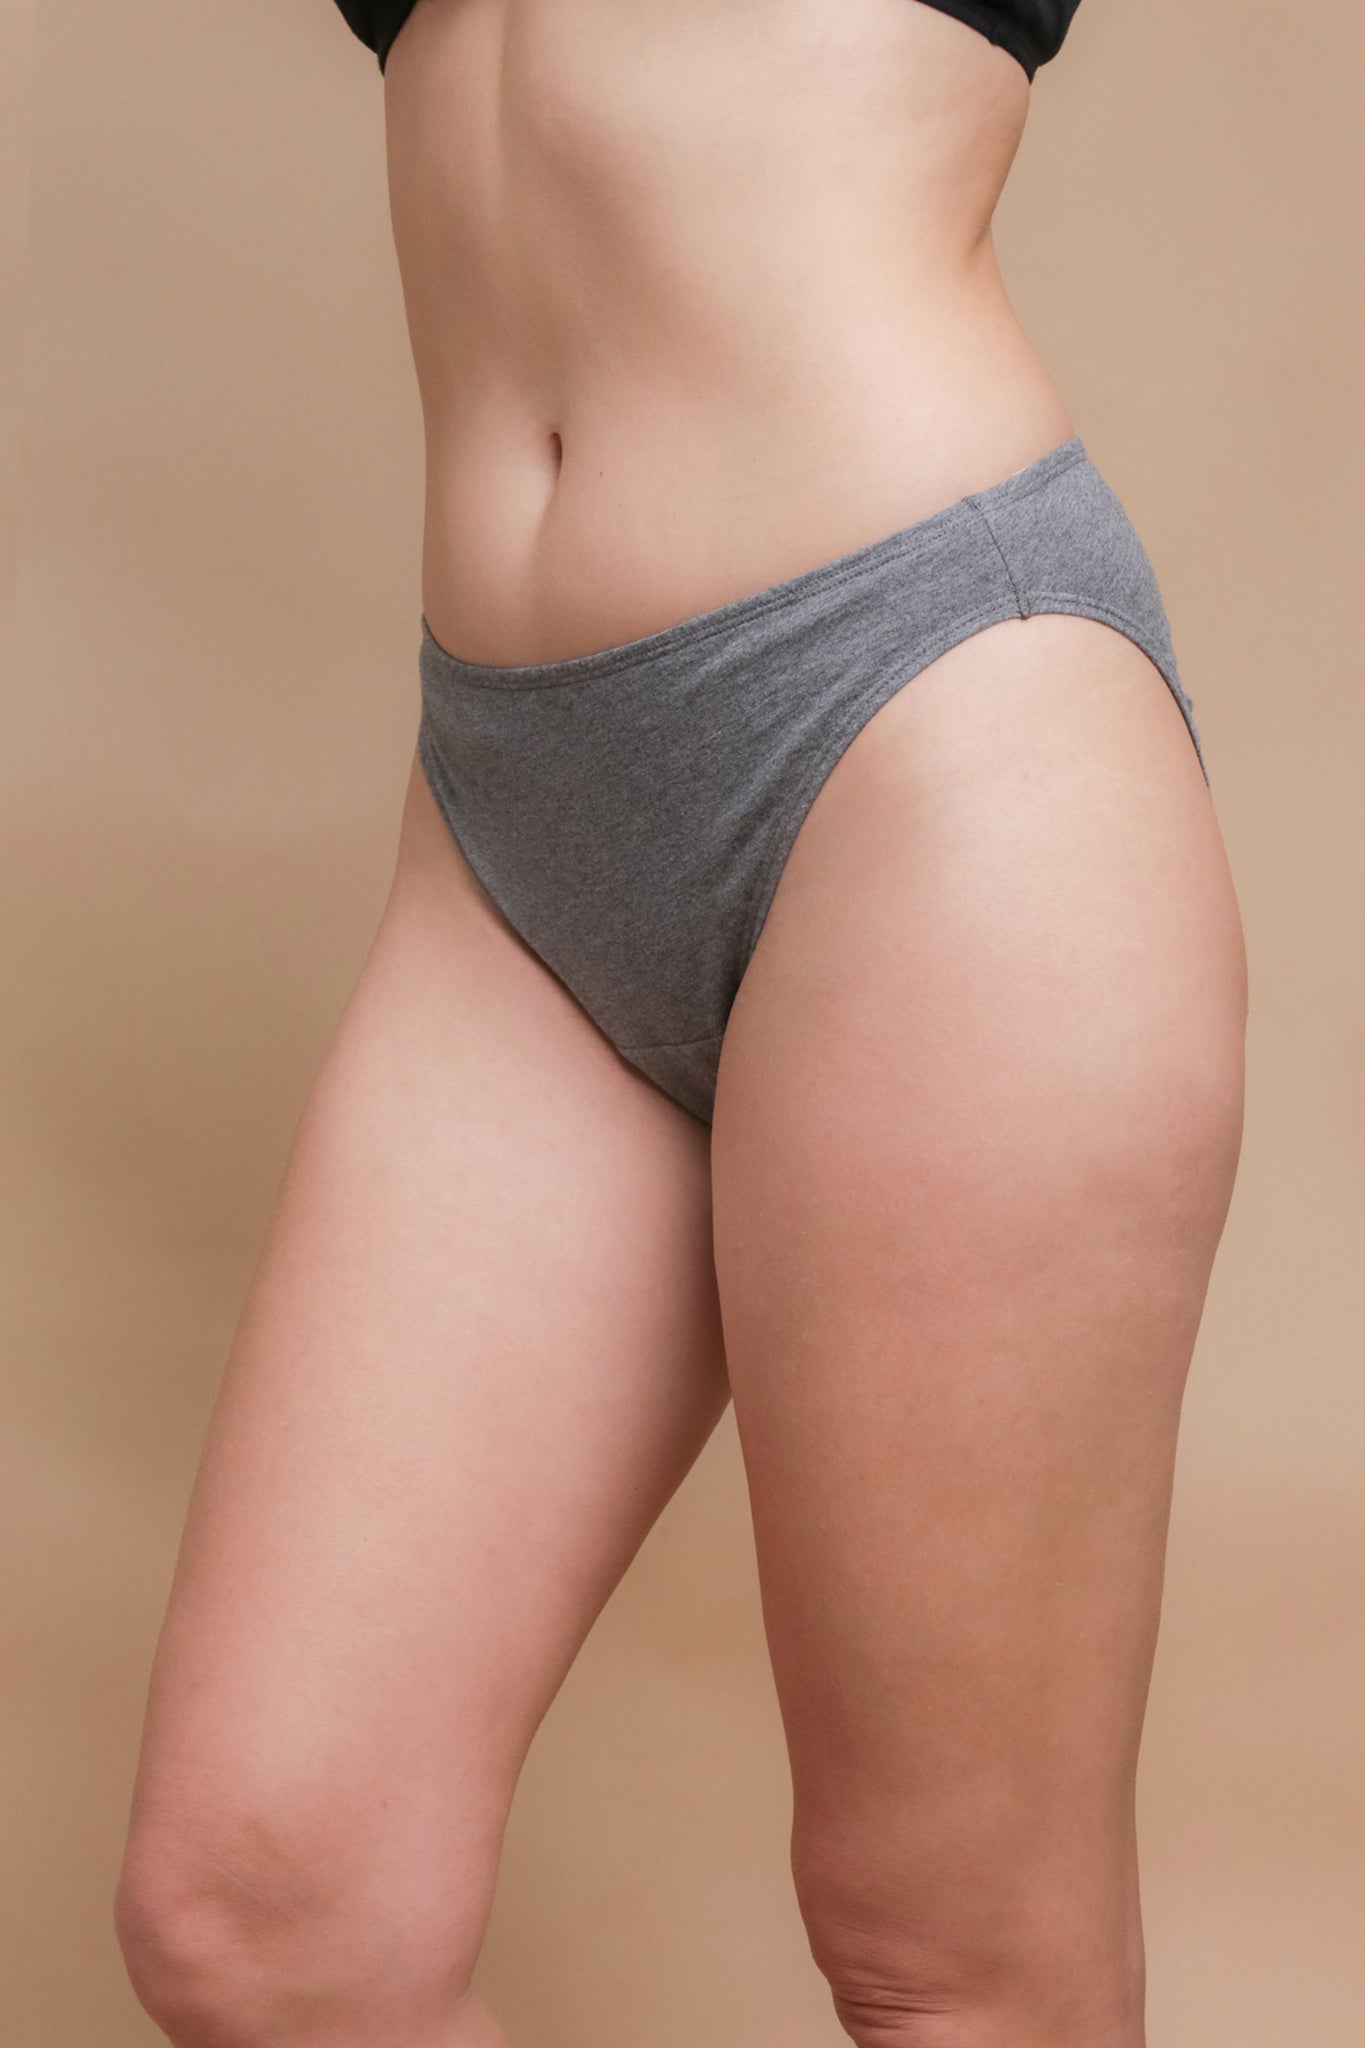 Women's Low-rise Contoured Brief (2/pack)